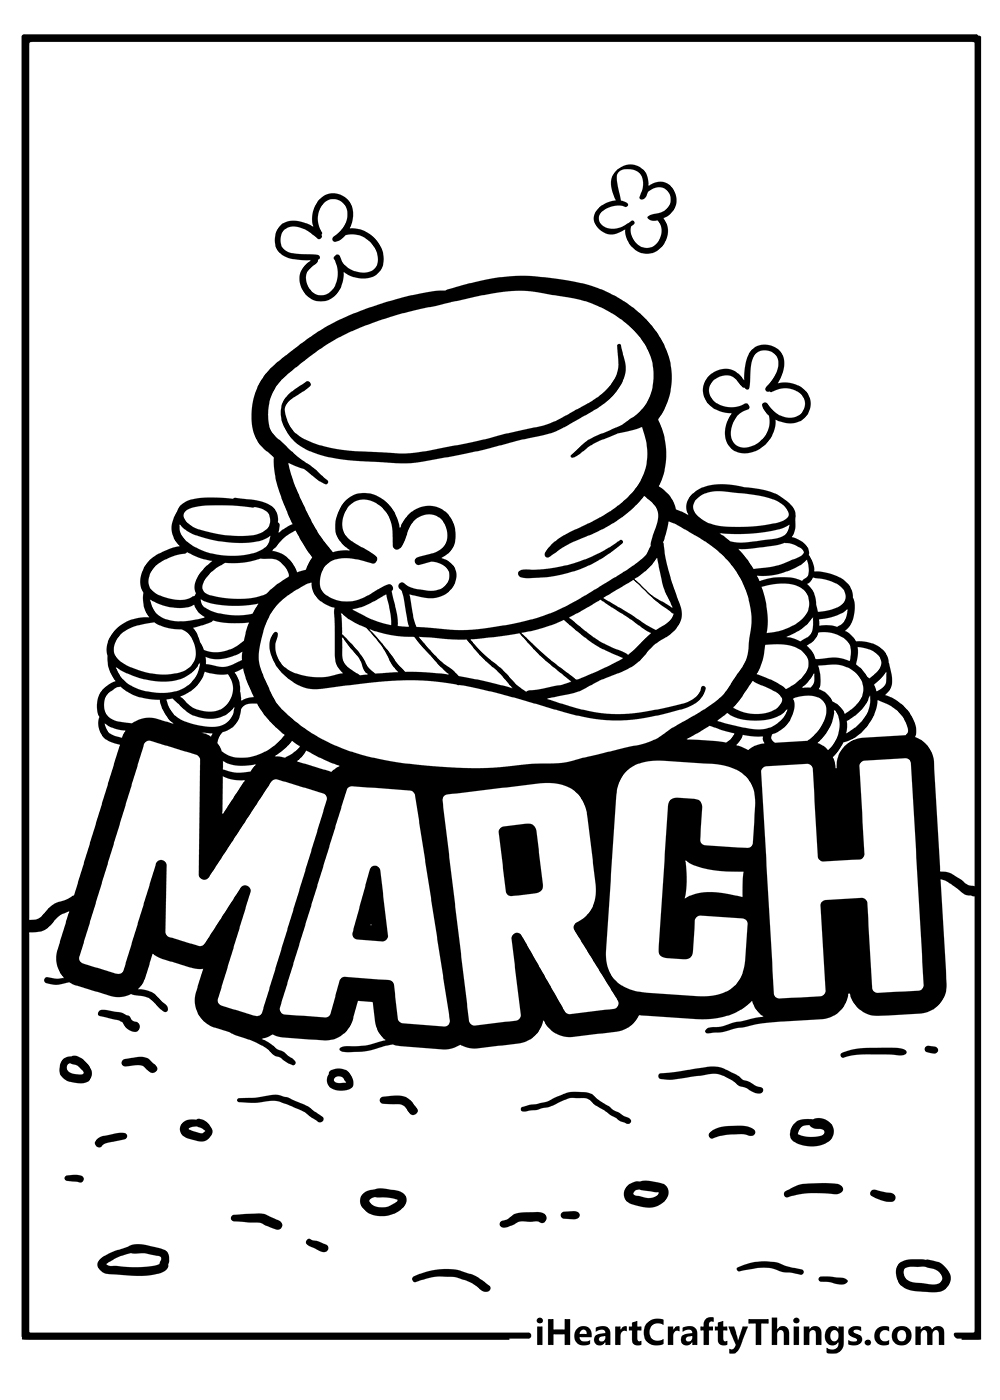 March coloring pages free printables